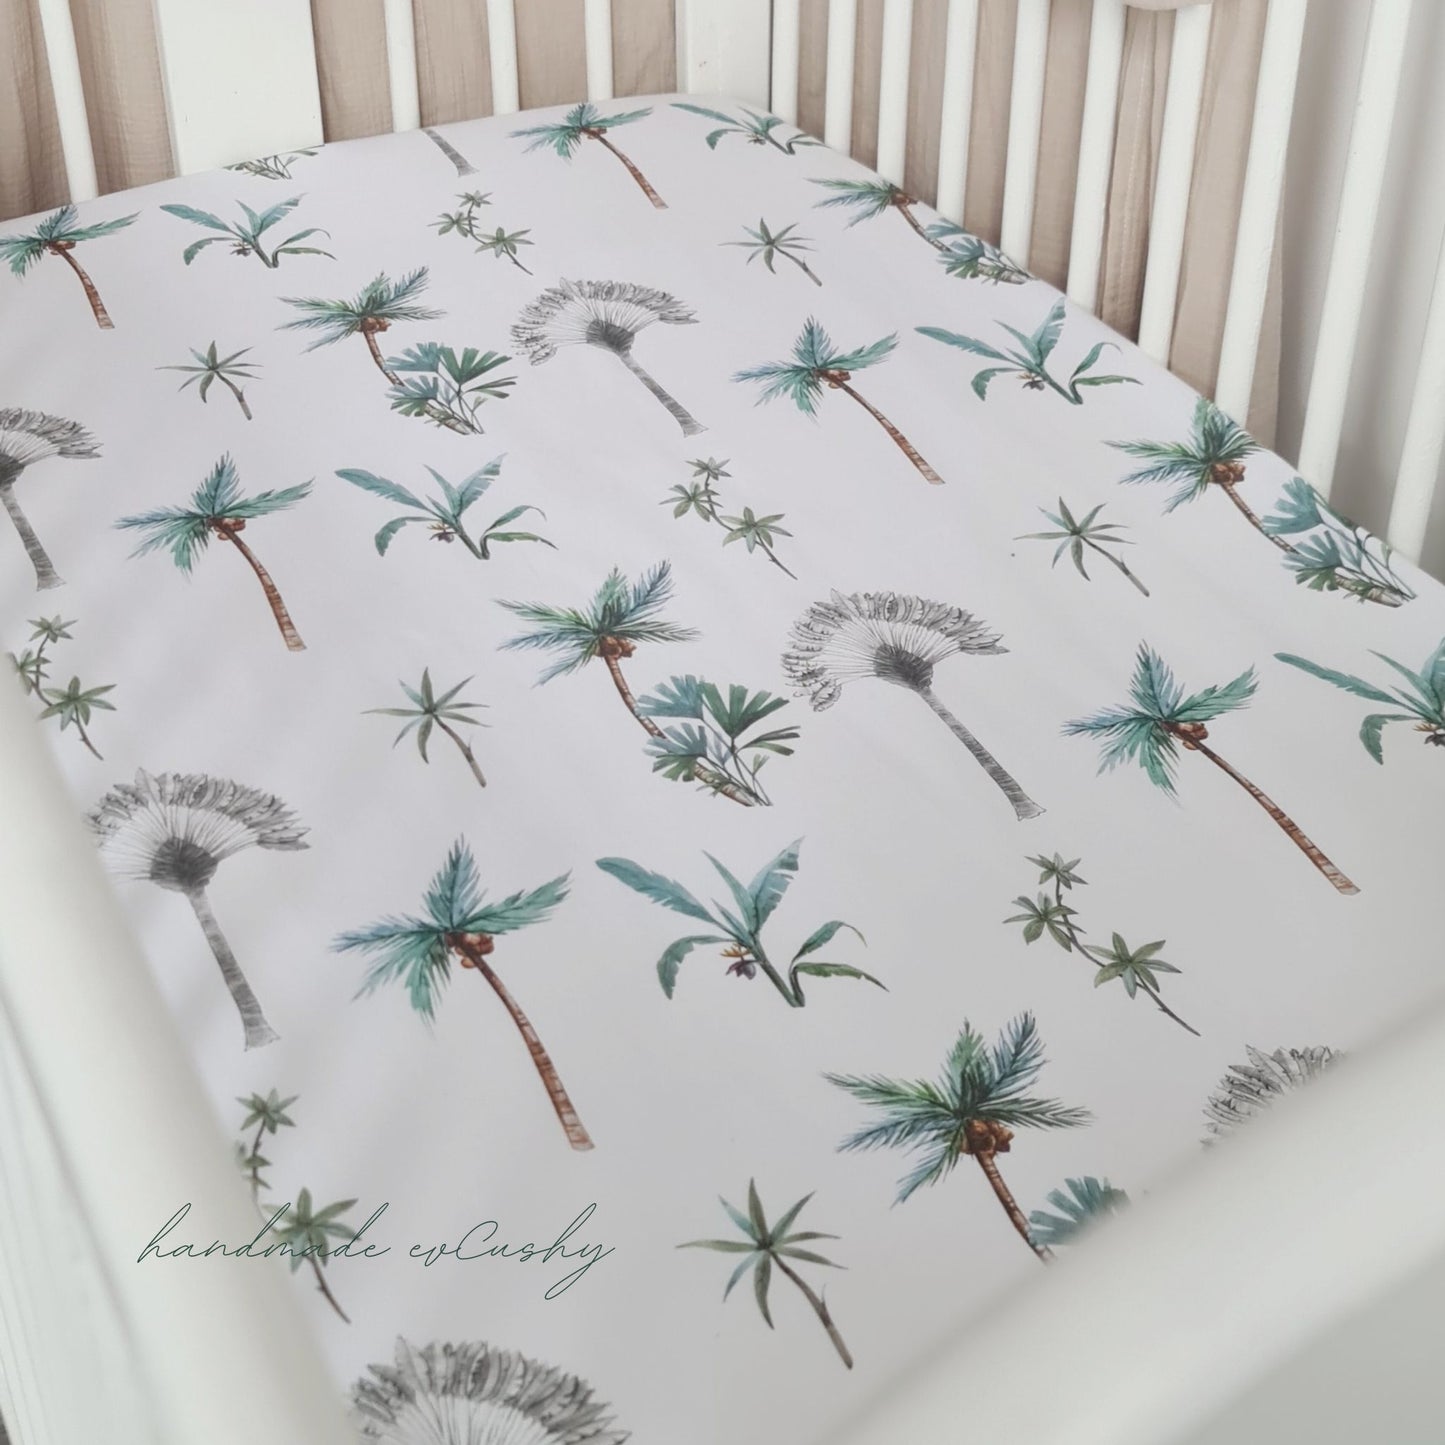 00% Cotton Fitted Cot Bed Sheet with Palm Tree Pattern, part of the Safari Dream Collection, designed for 70x140 cm mattresses white and green